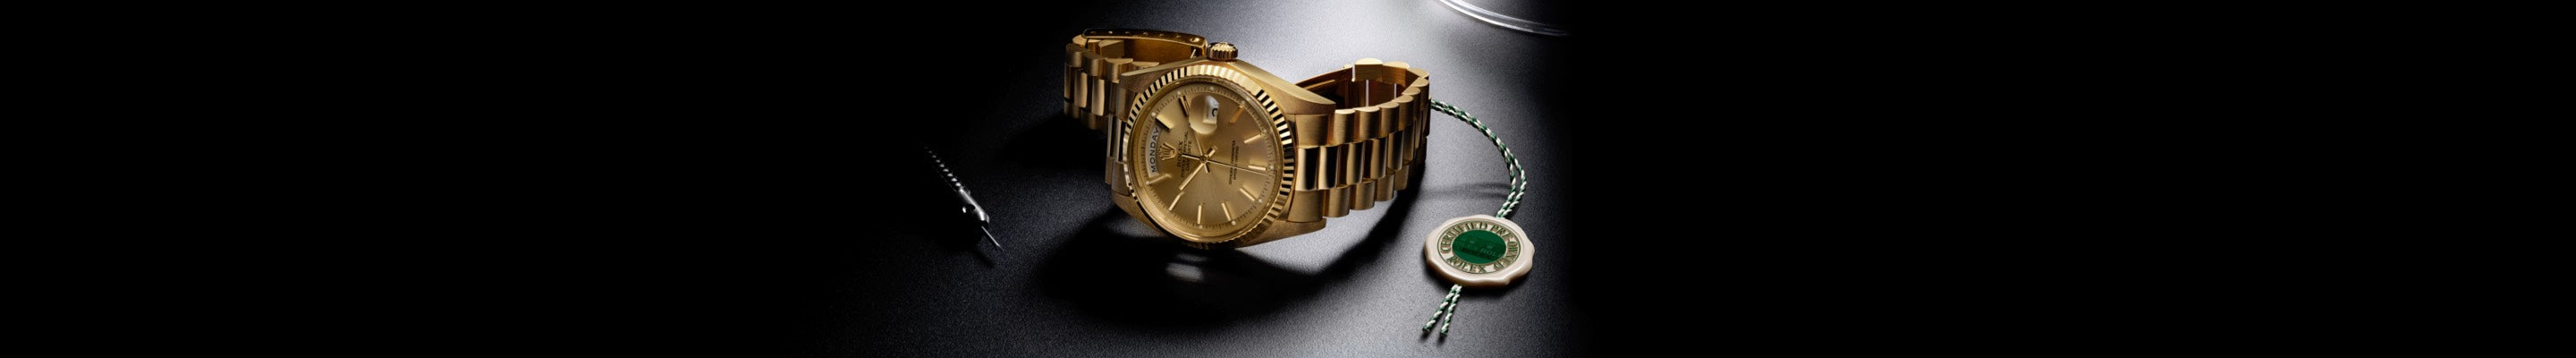 rolex-certification-cover-2021